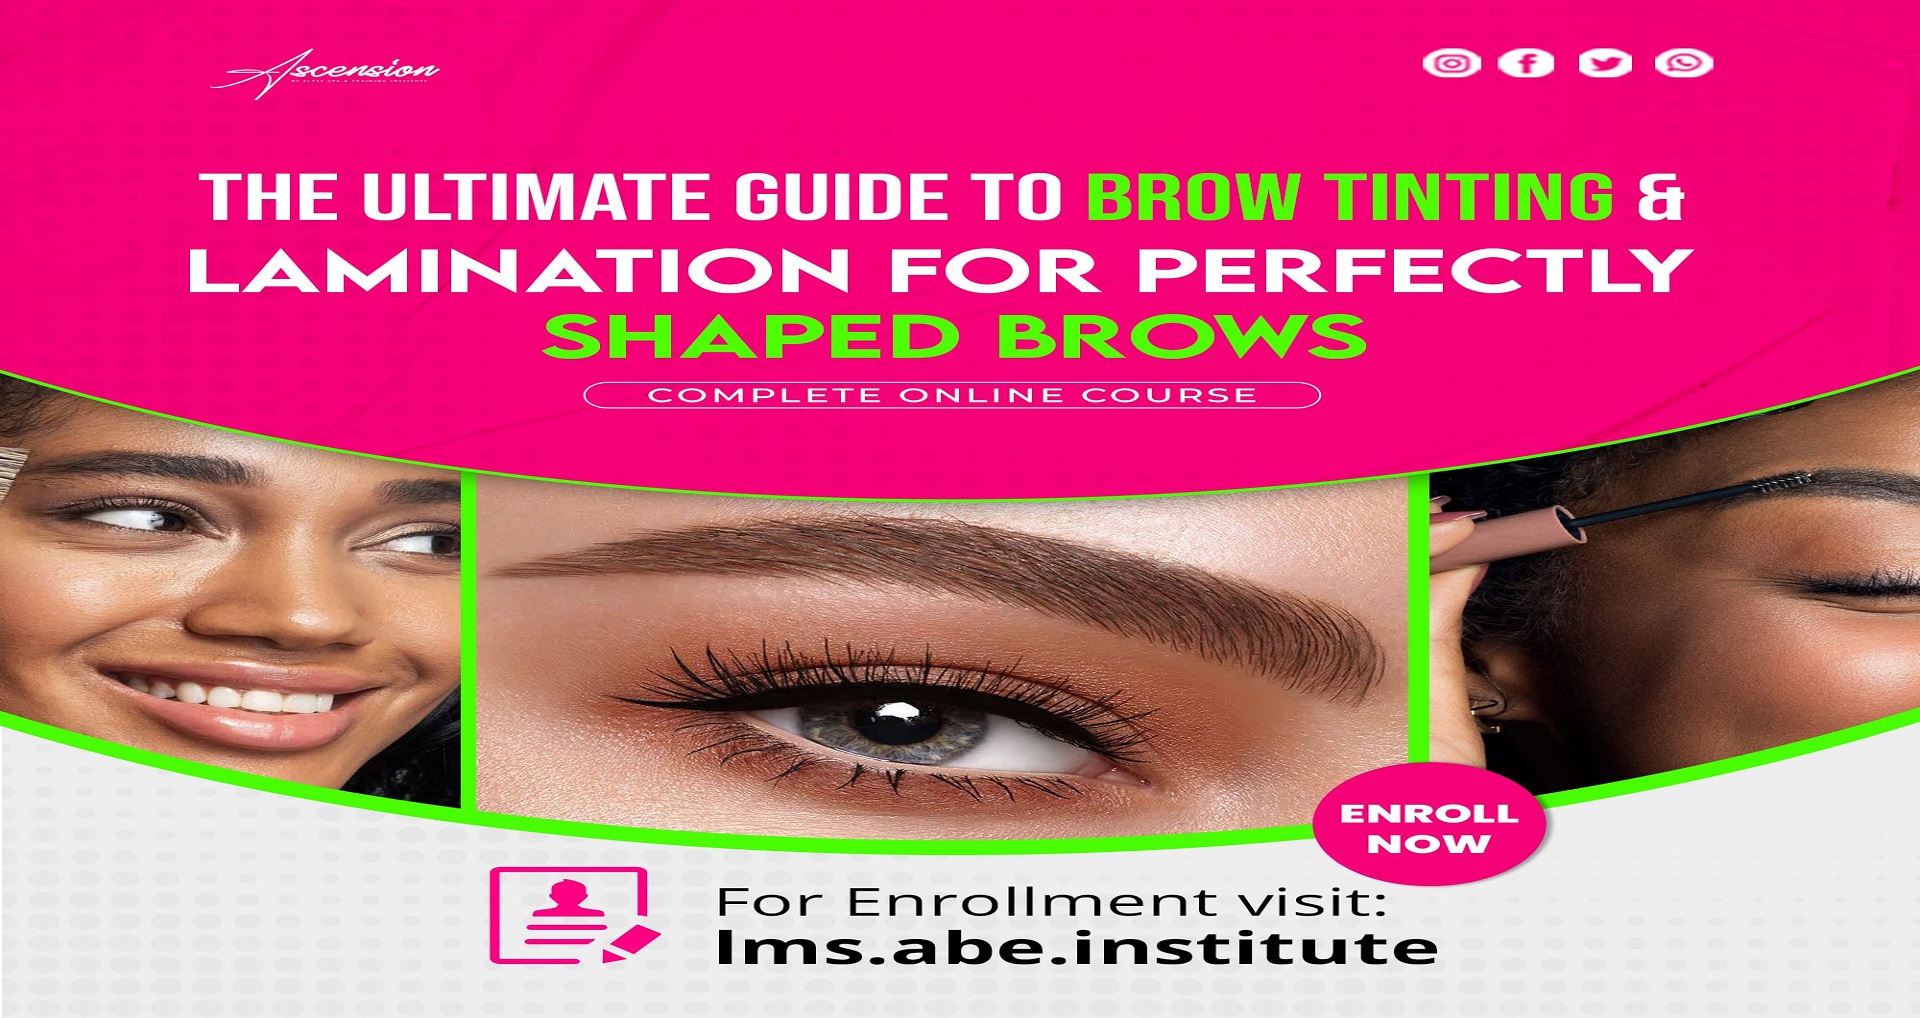 The Ultimate Guide to Brow Tinting and Lamination for Perfectly Shaped Brows